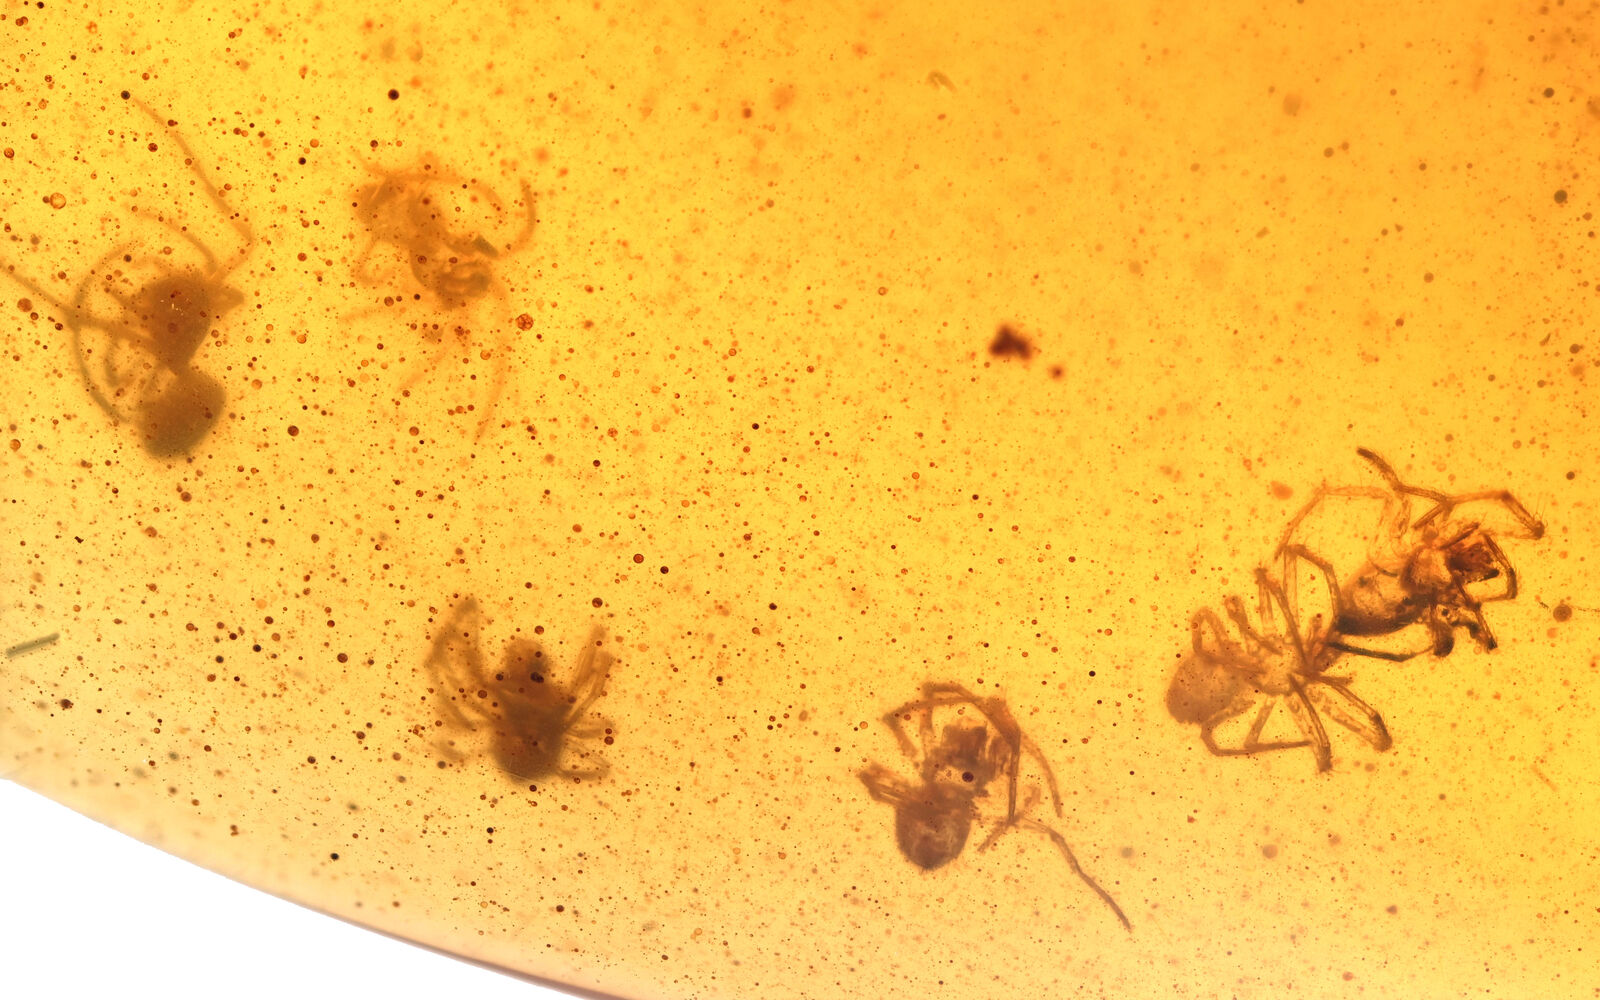 Rare nest of Spiderlings, Fossil inclusion in Burmese Amber